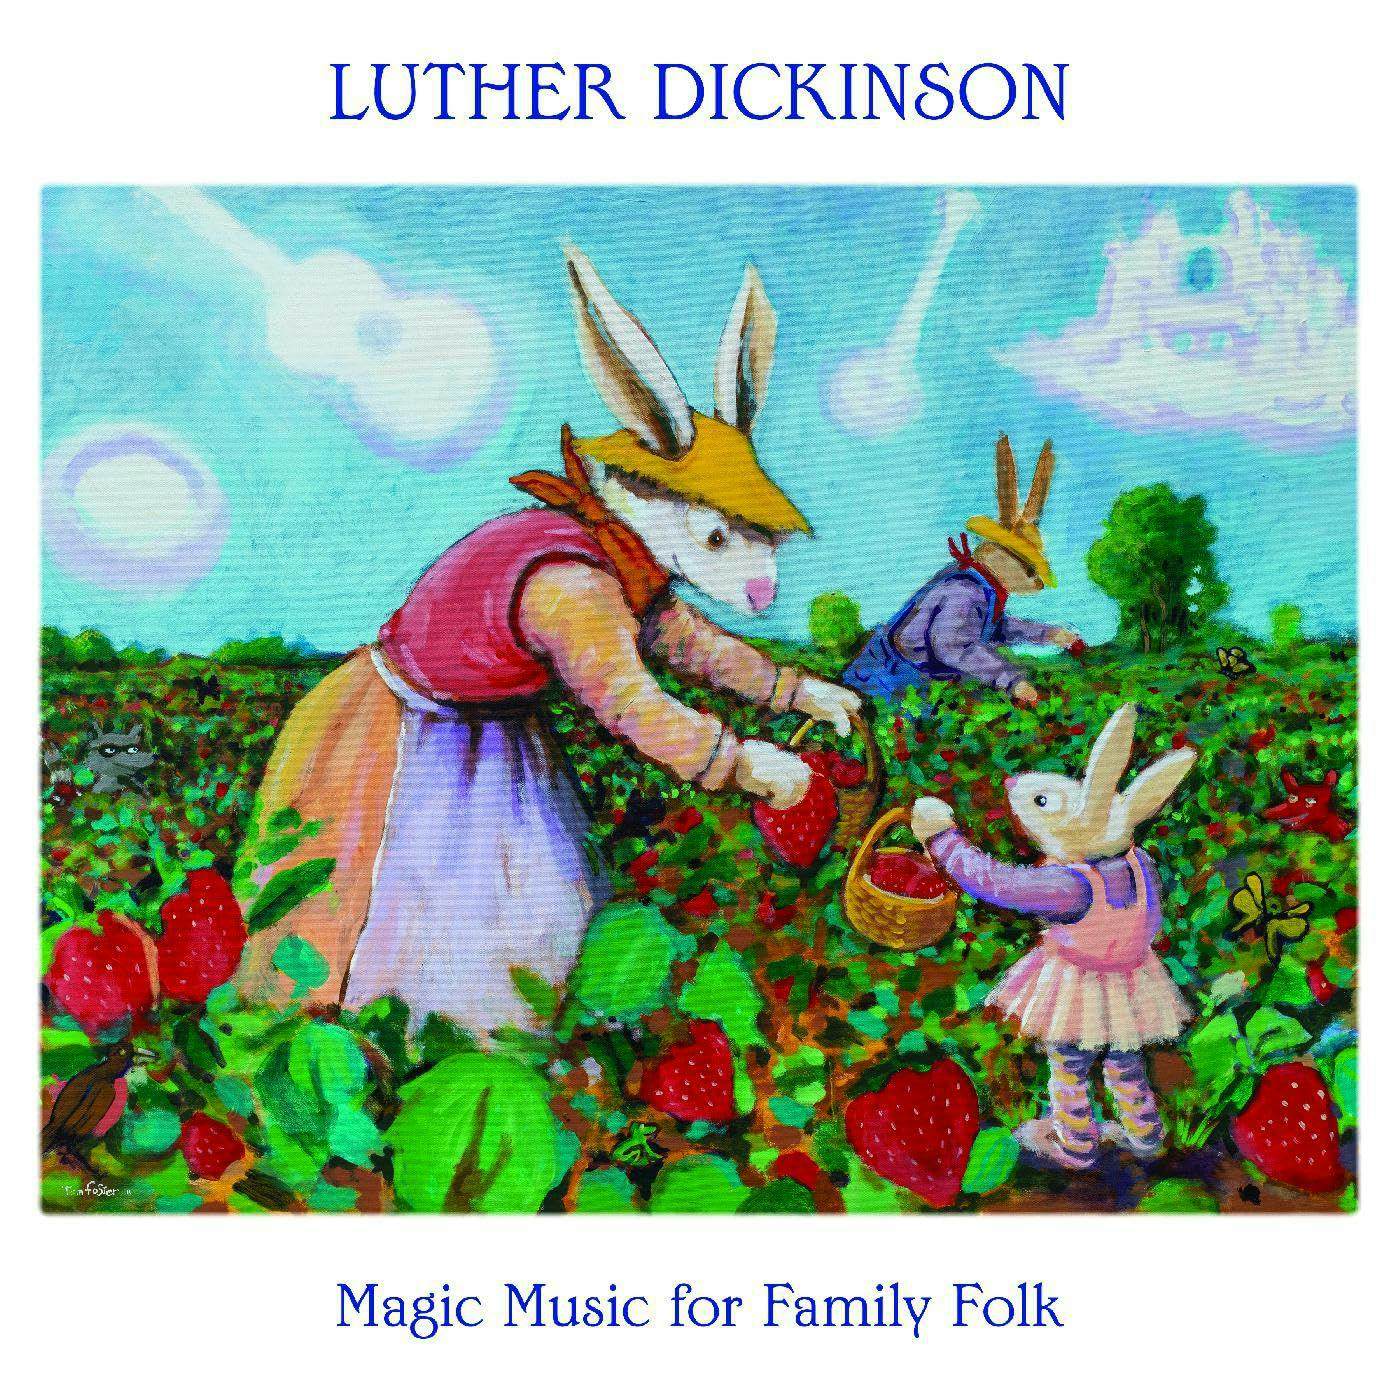 Luther Dickinson MAGIC MUSIC FOR FAMILY FOLK Vinyl Record